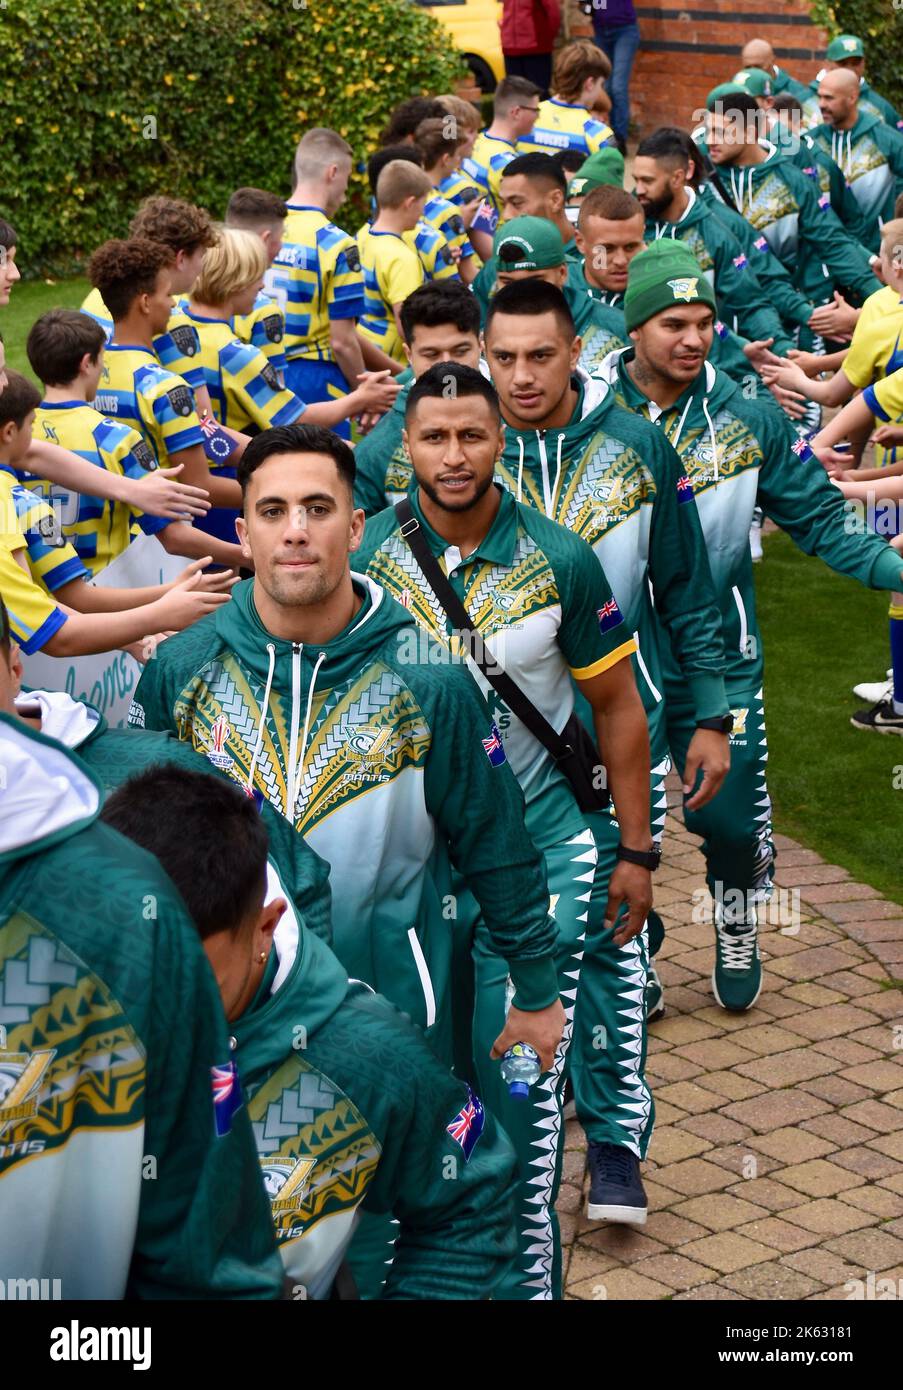 Darlington, UK. 11 Oct 2022. The Cook Islands men’s Rugby League World Cup team have arrived at Rockliffe Hall, where they will be based for three weeks during their RLWC2021 campaign which includes a game against rivals Tonga at Middlesbrough’s Riverside Stadium. The squad were greeted with a youth brass band and young players from Yarm Wolves before meeting local representatives and the media. They also performed the Haka. Credit: Teesside Snapper/Alamy Live News Stock Photo